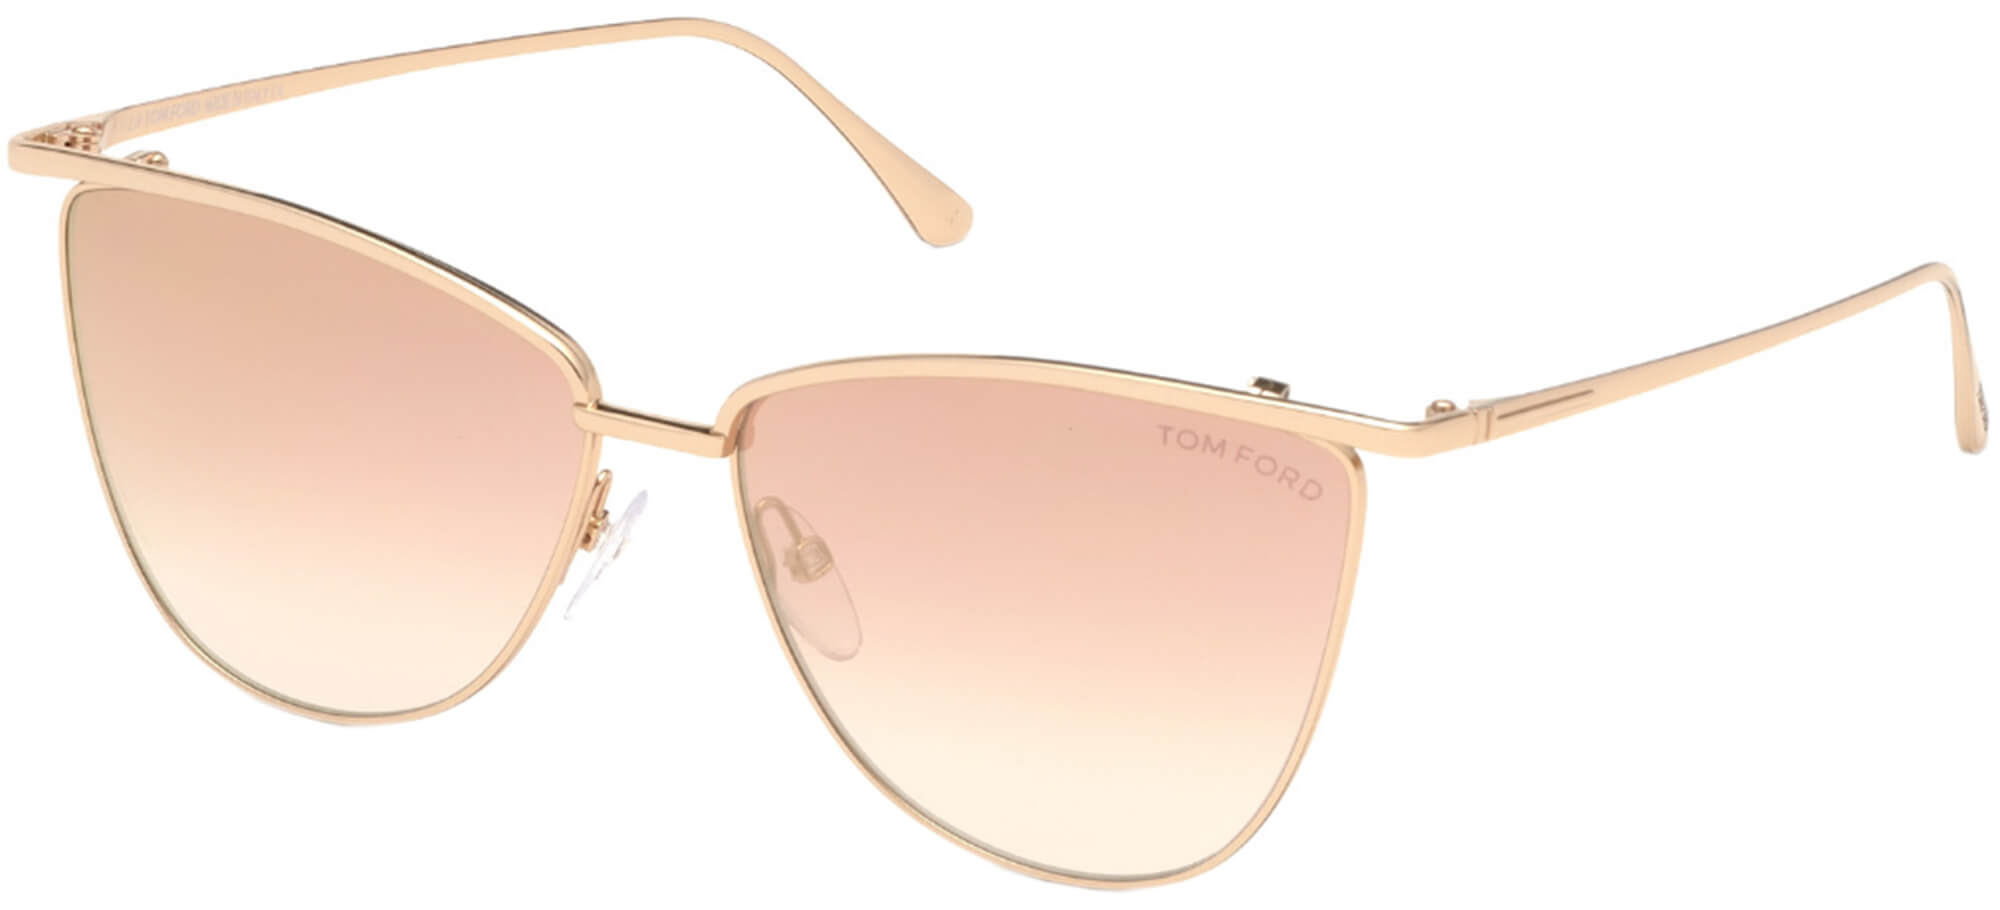 Tom FordVERONICA FT 0684Rose Gold/red Shaded (33T)